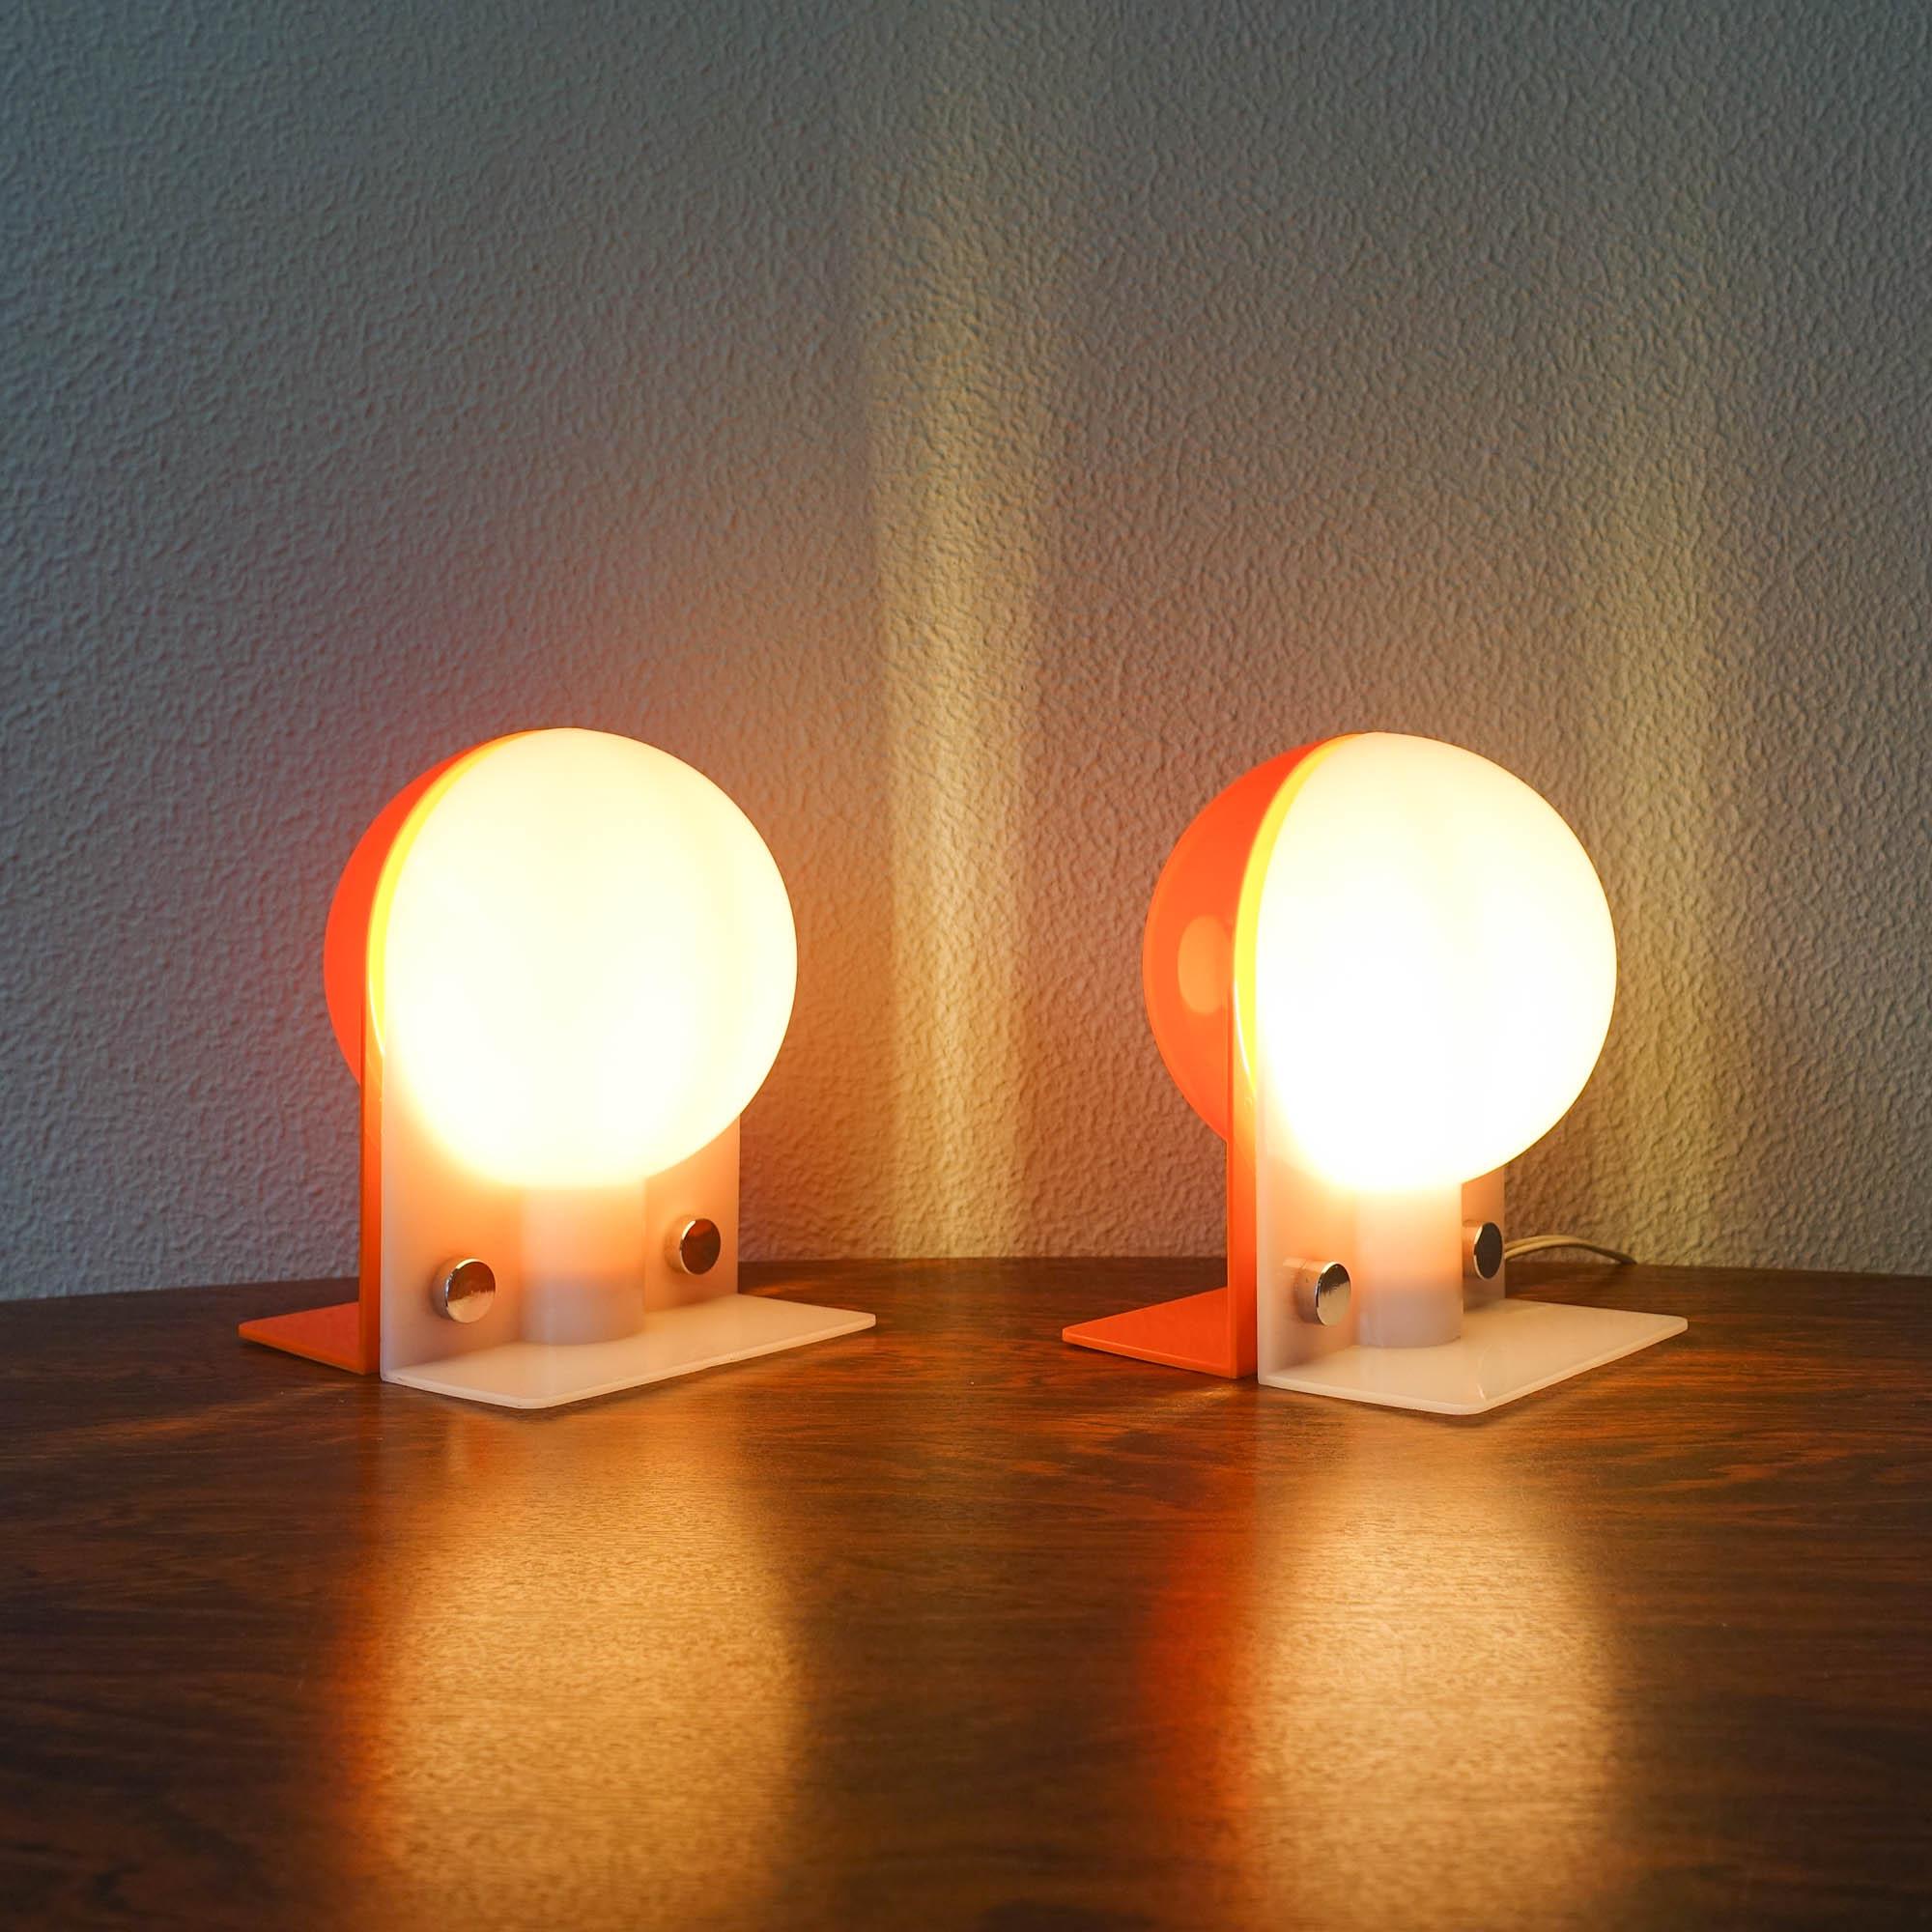 This pair of table lamps was designed by Sergio Brazzoli & Emmano Lampa for Harvey Guzzini, in Italy, during the 1970's. Each lamp features a white and orange acrylic half globes that are together throught two chrome fittings. These Harvey Guzzini